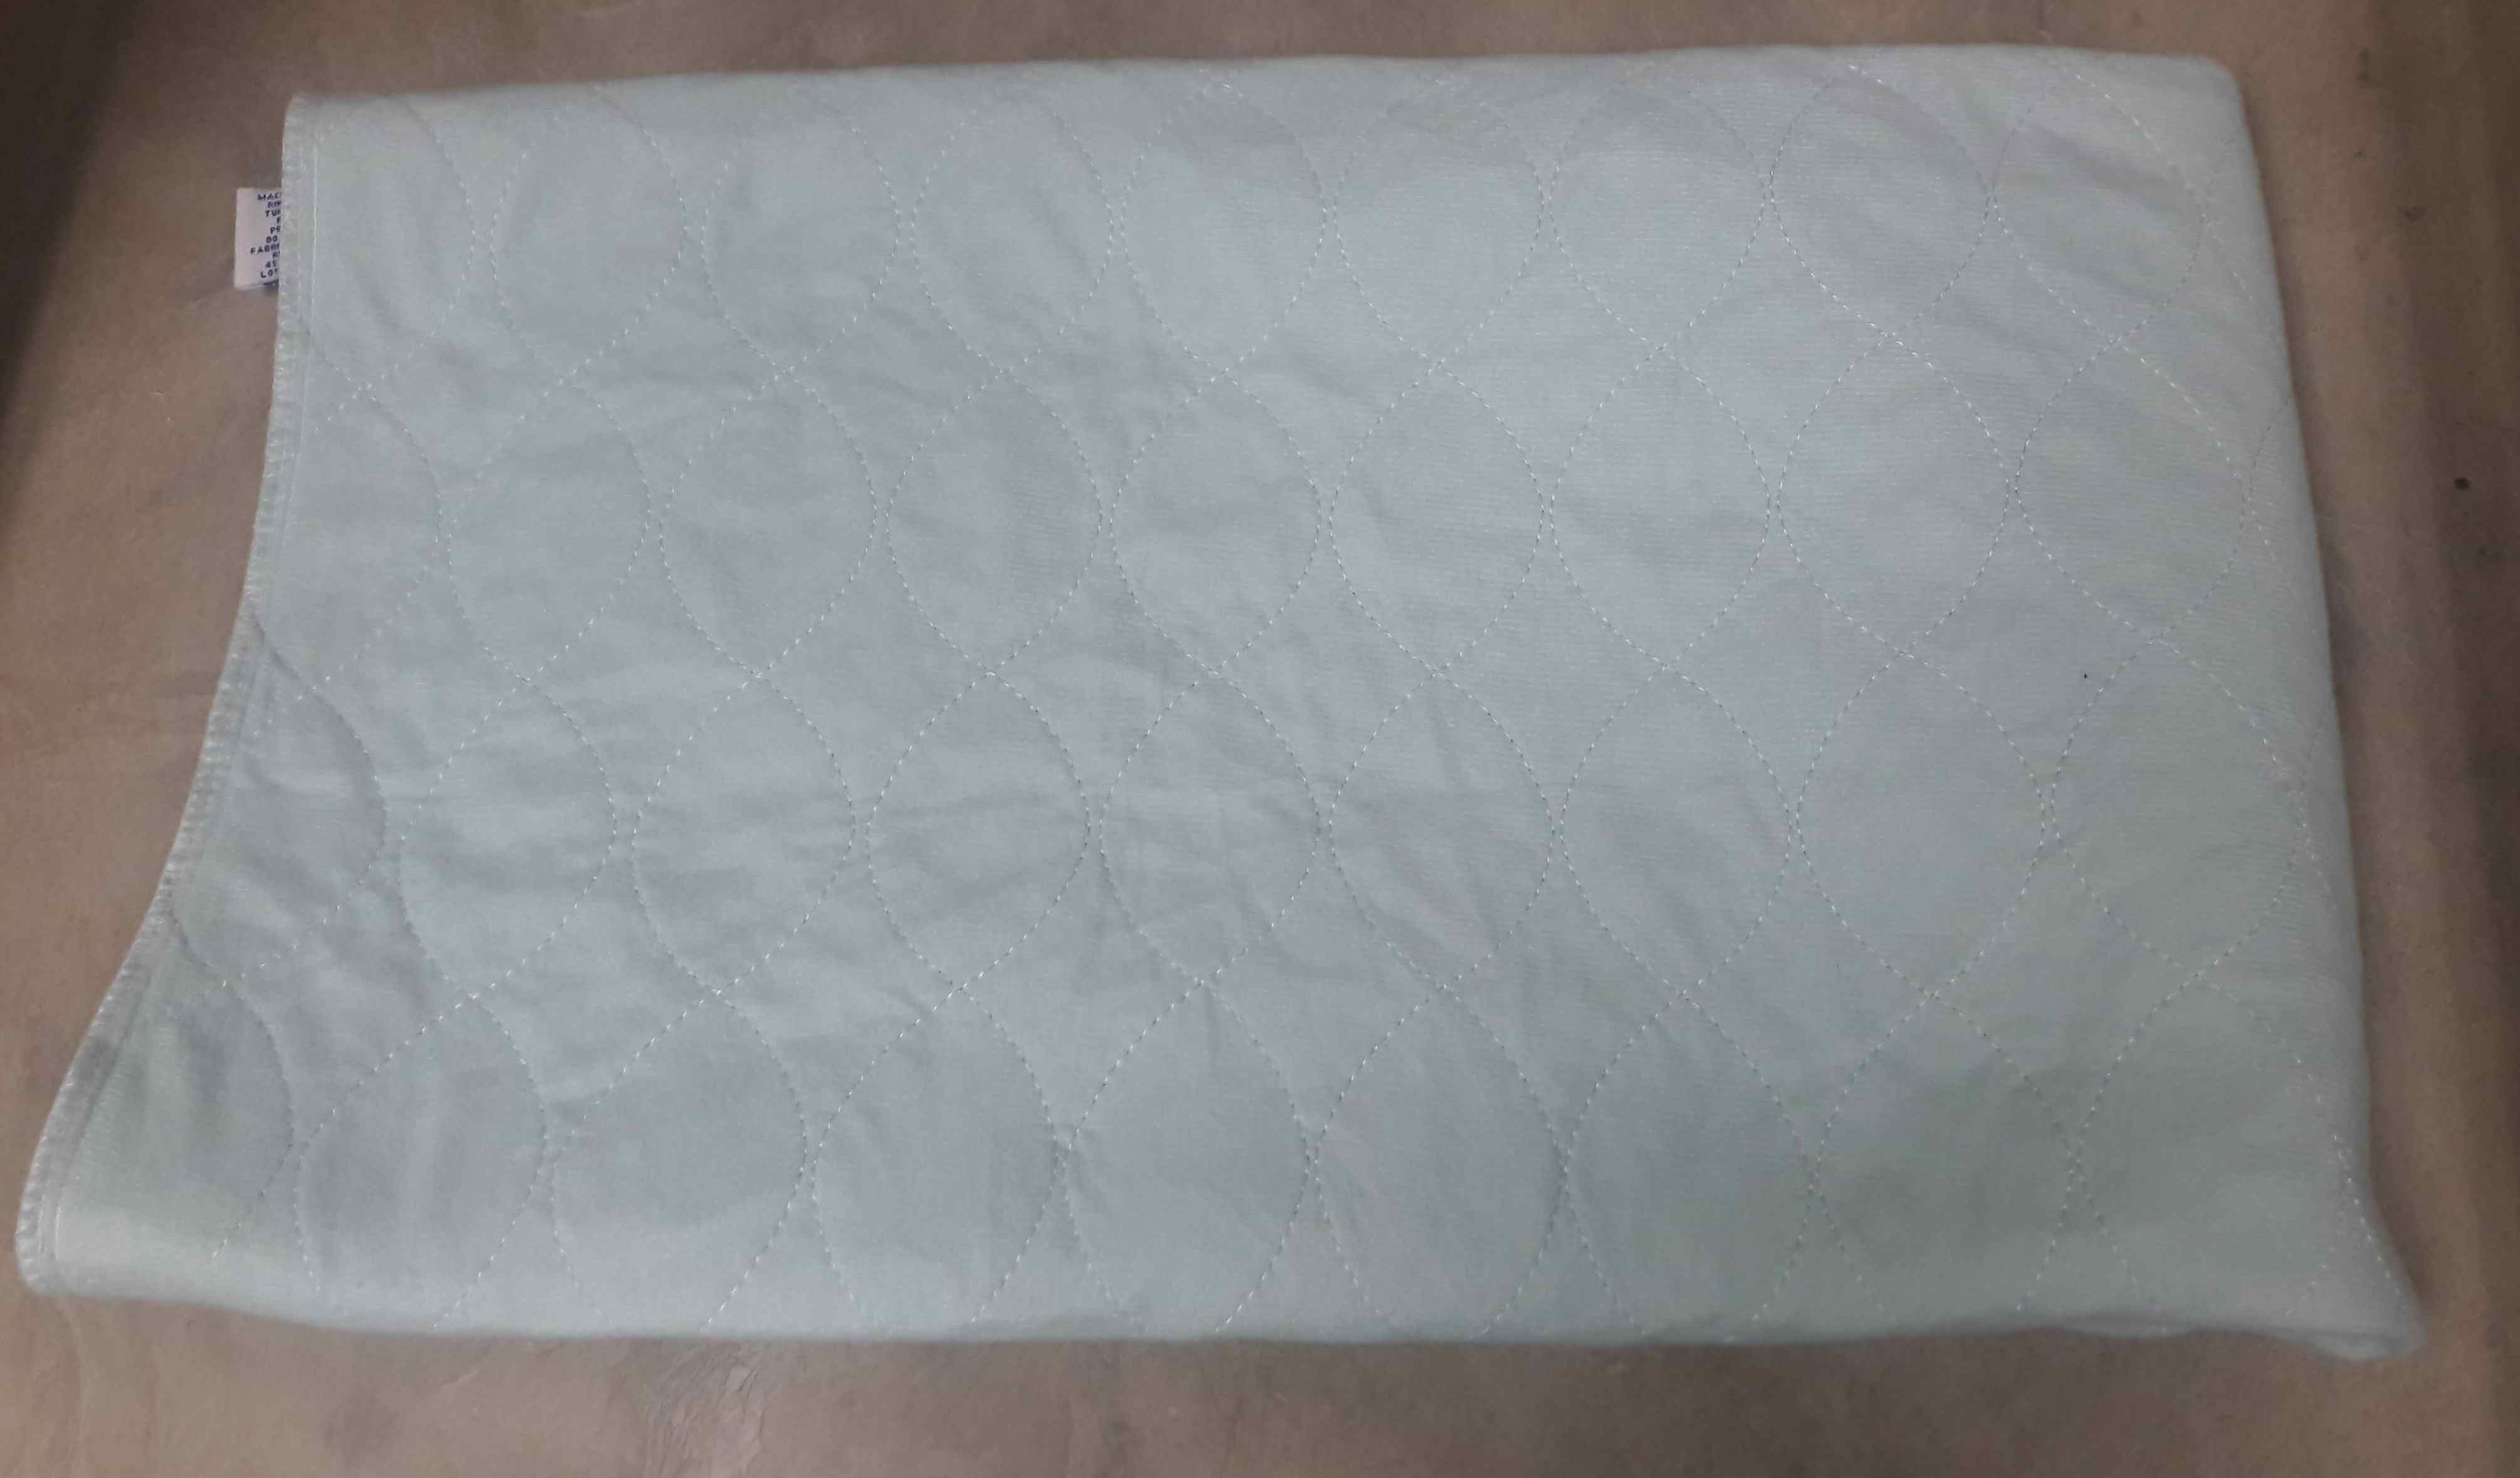 Folded incontinence pad